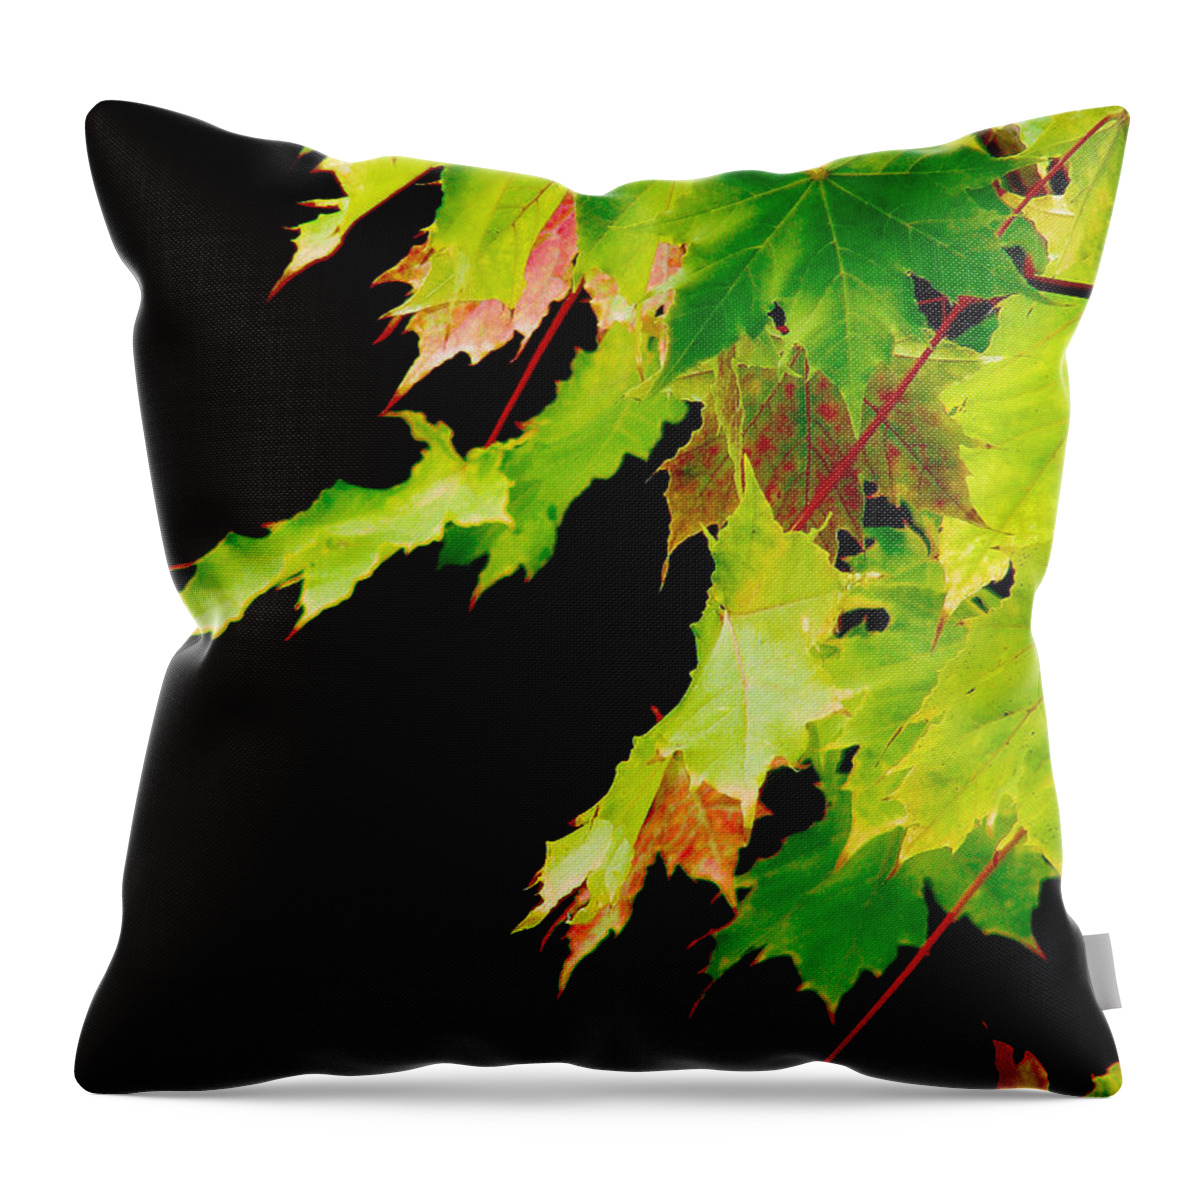 Maple Throw Pillow featuring the photograph The Beginning Of Change by Rory Siegel